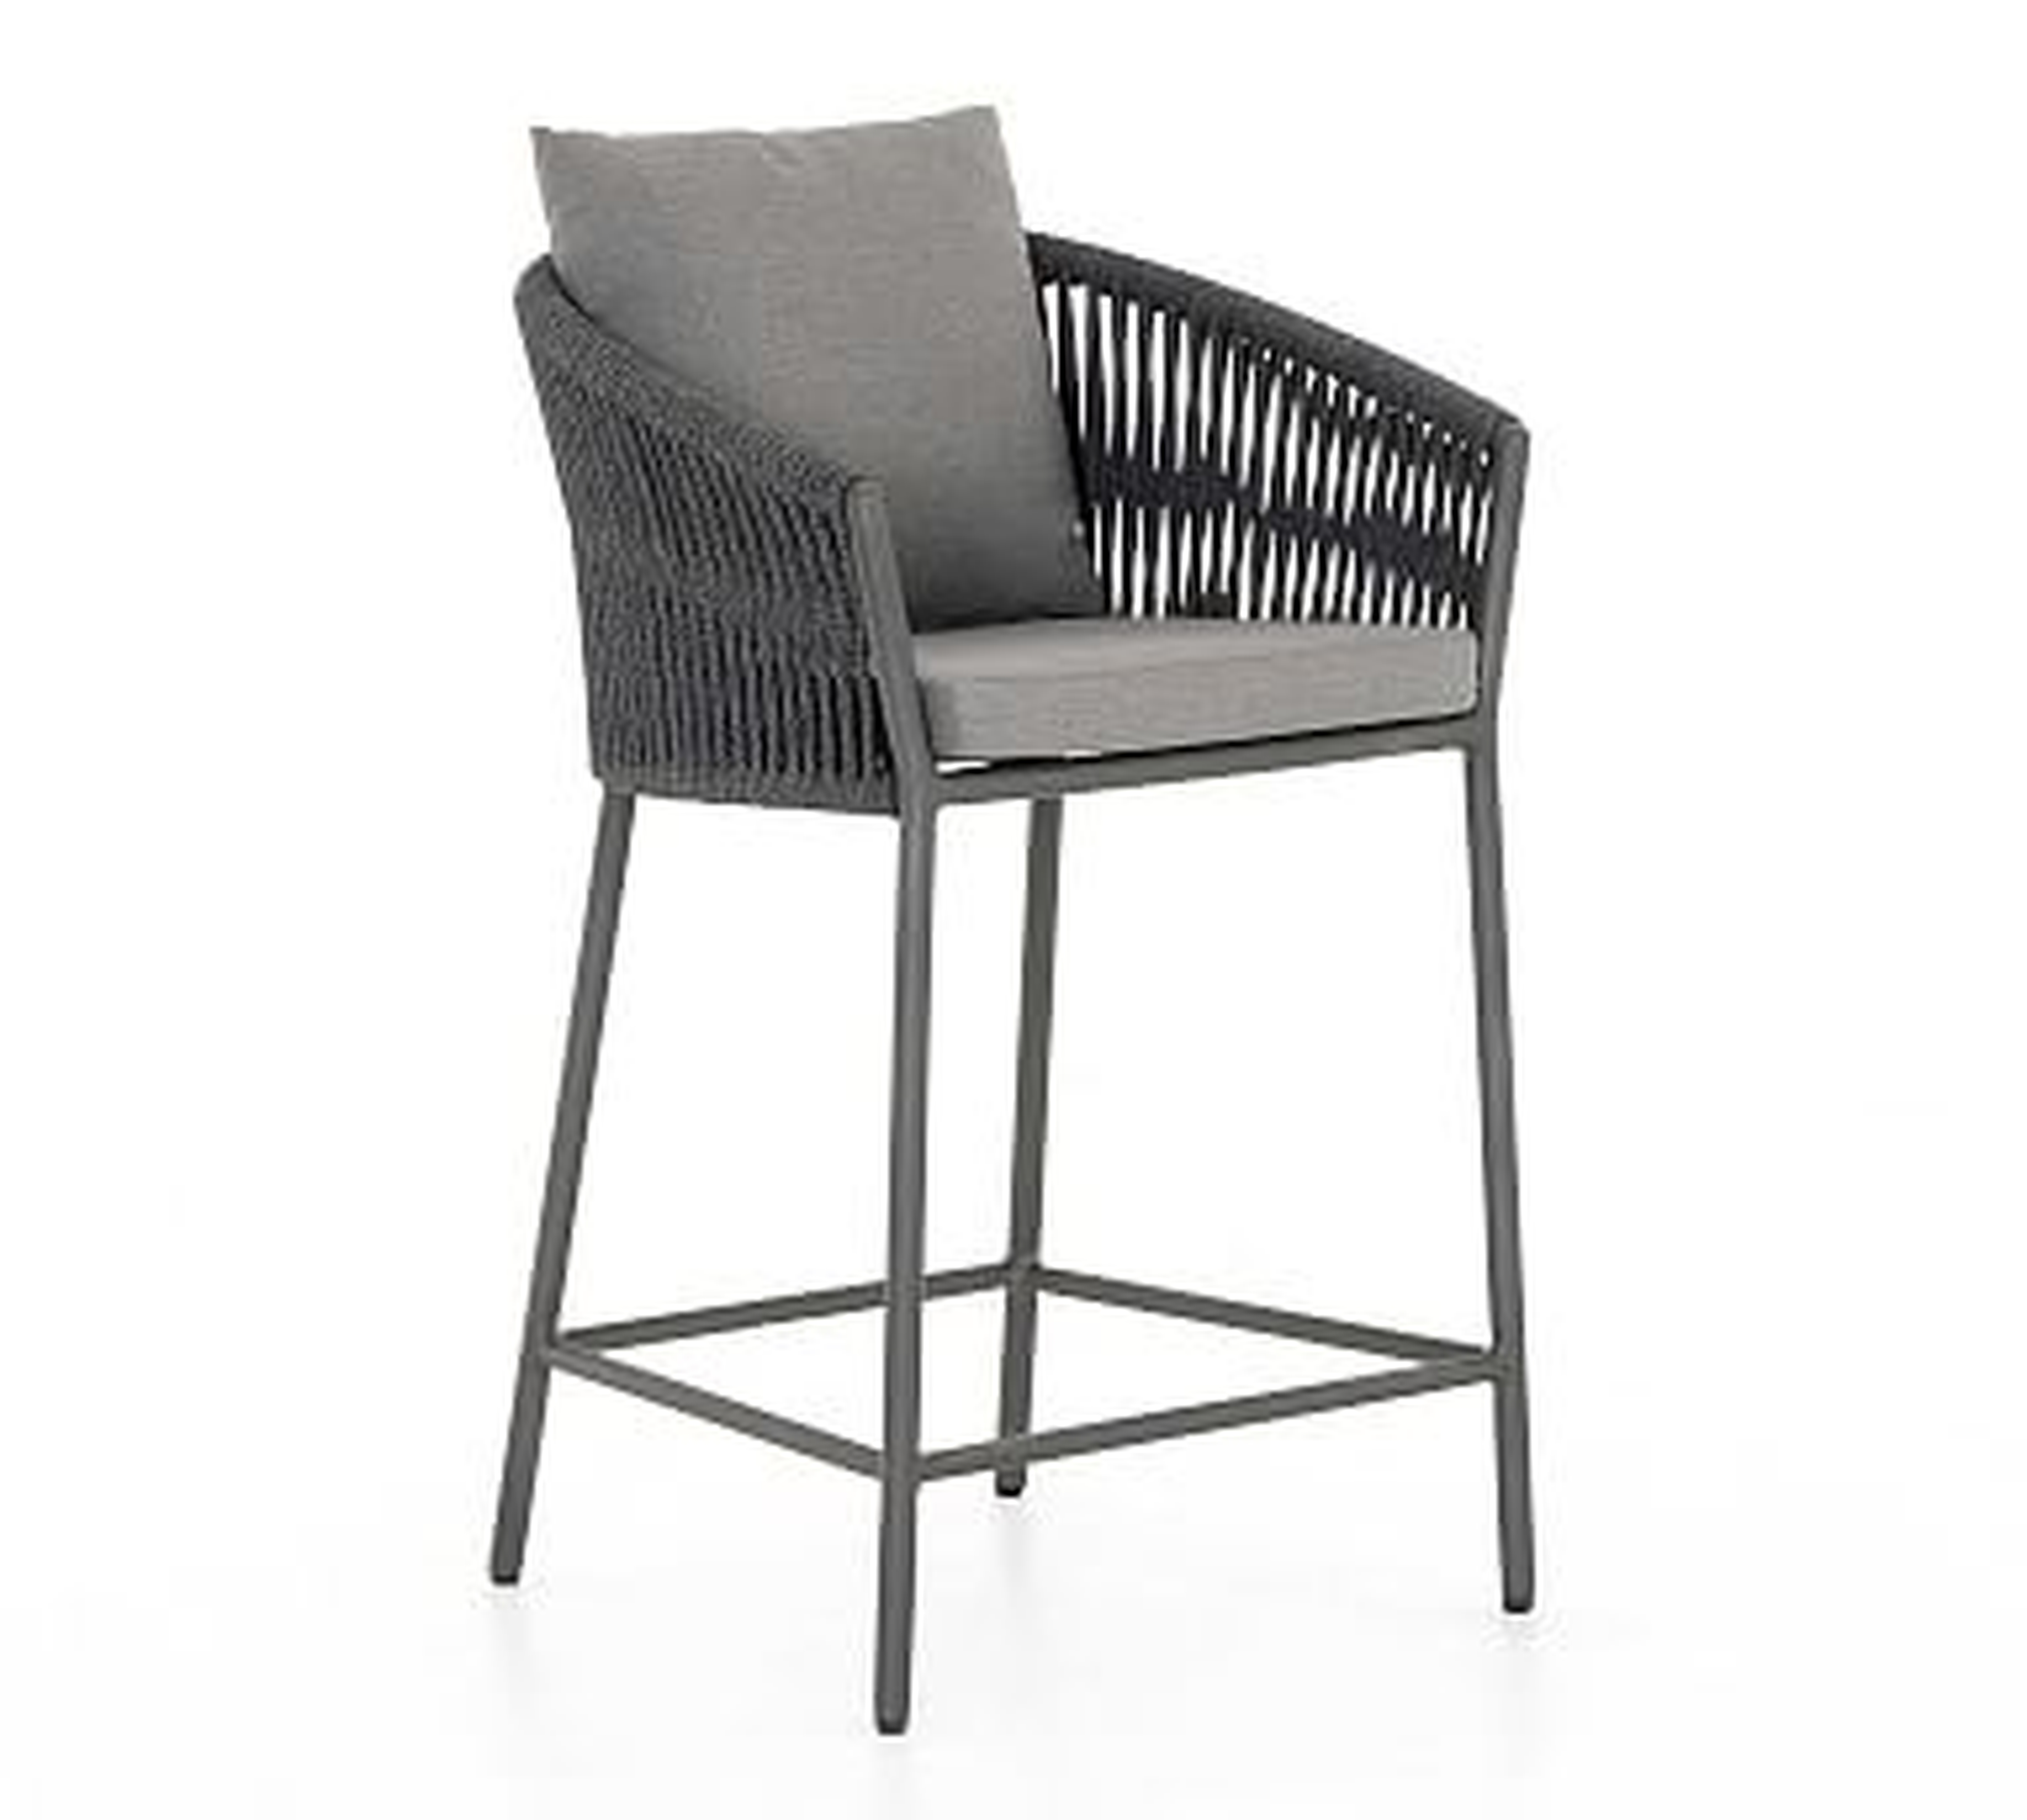 Darley Outdoor Counter Stool, Charcoal &amp; Bronze (24.5"seat height without cushion) - Pottery Barn